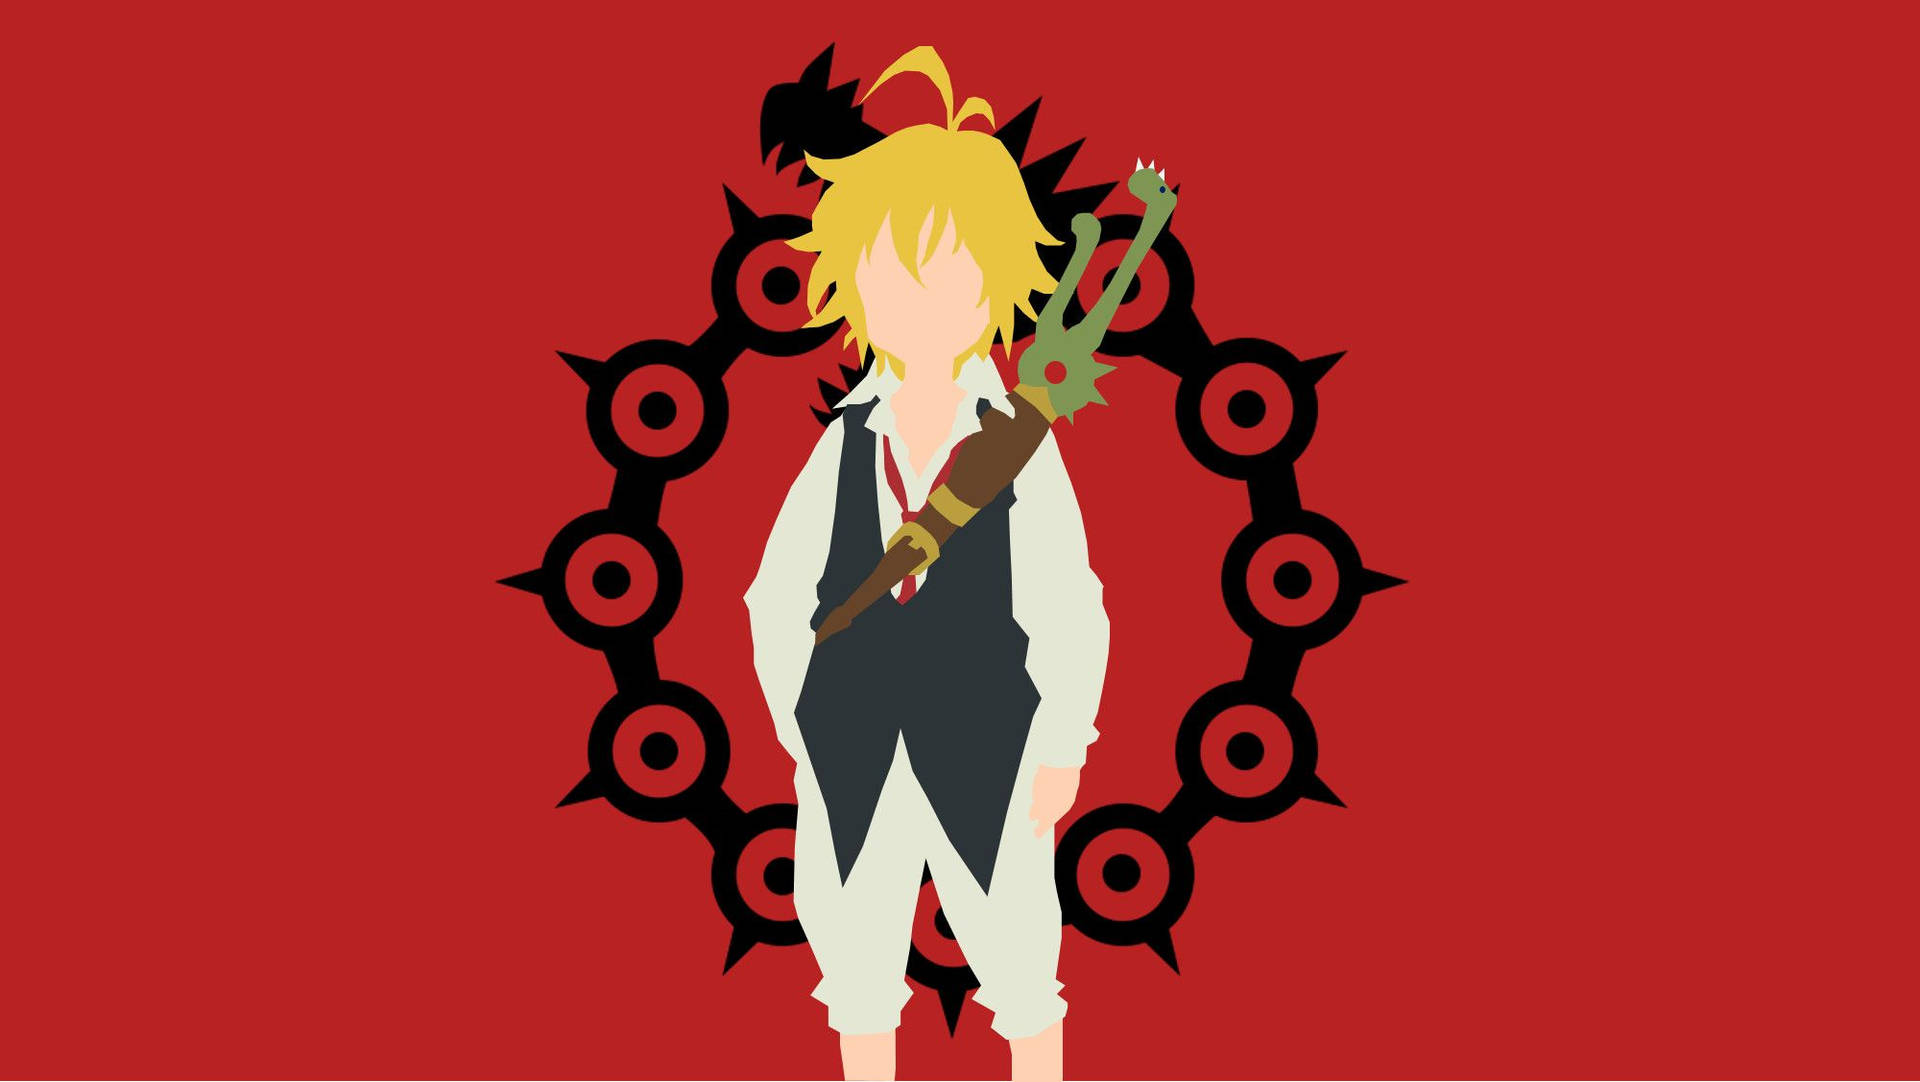 Harbinger of Demon Lord - Meliodas and the Seven Deadly Sins Wallpaper